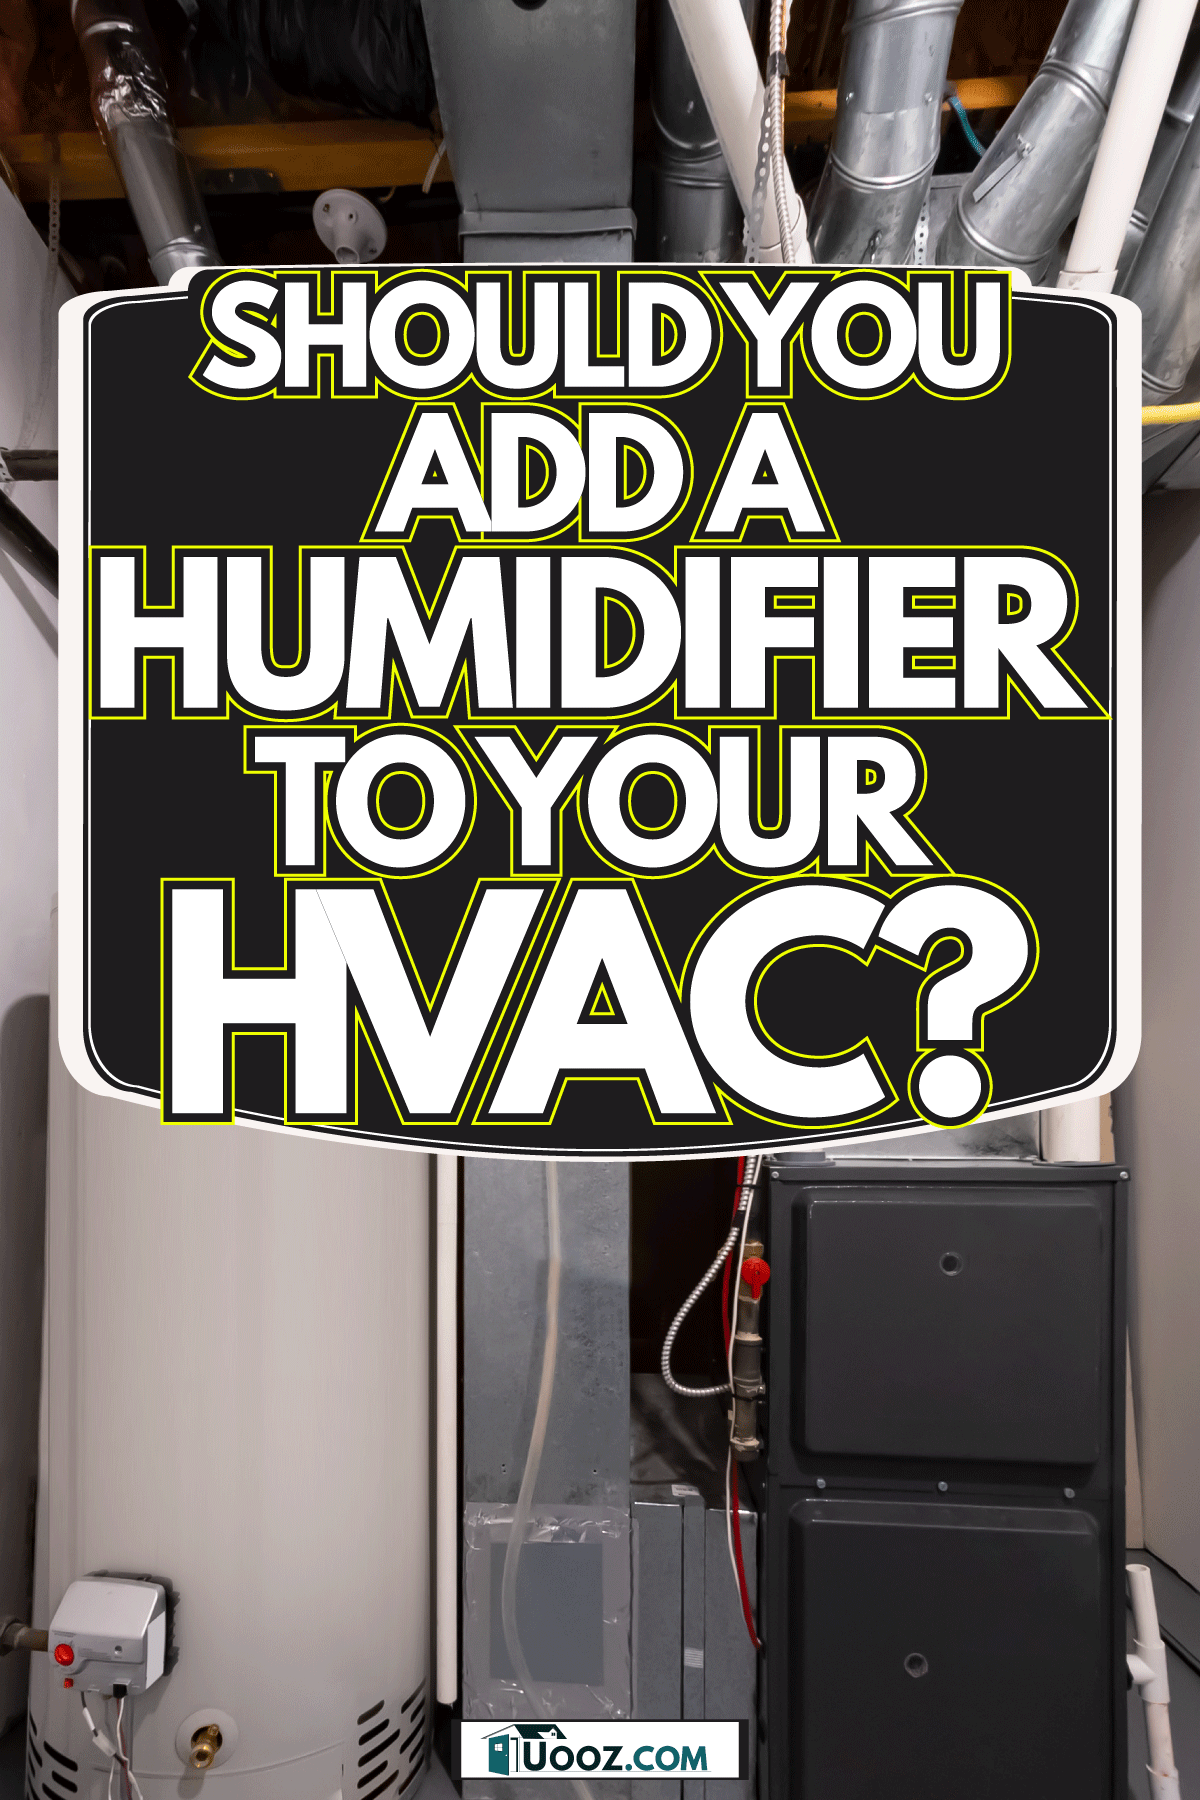 Adding Humidifier in your hvac necessary, Should You Add A Humidifier To Your HVAC